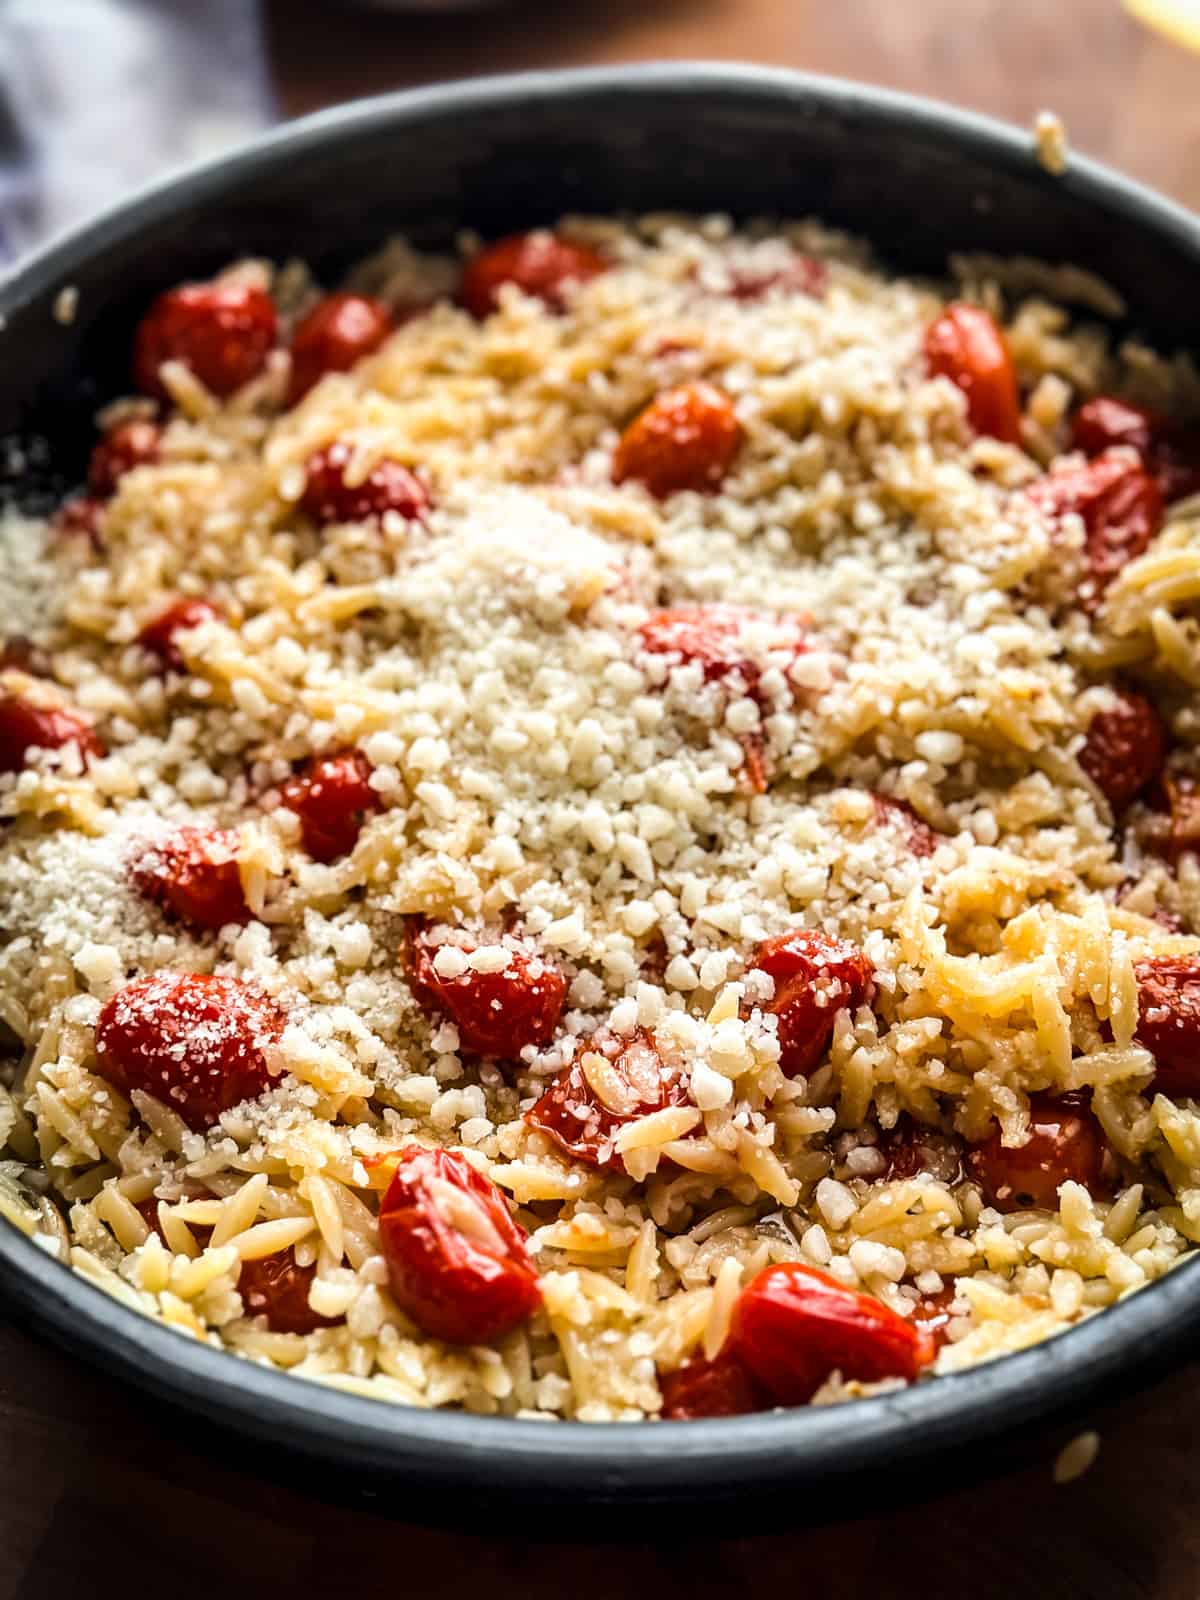 A round baking pan with orzo pasta, tomatoes, and grated parmesan on top.